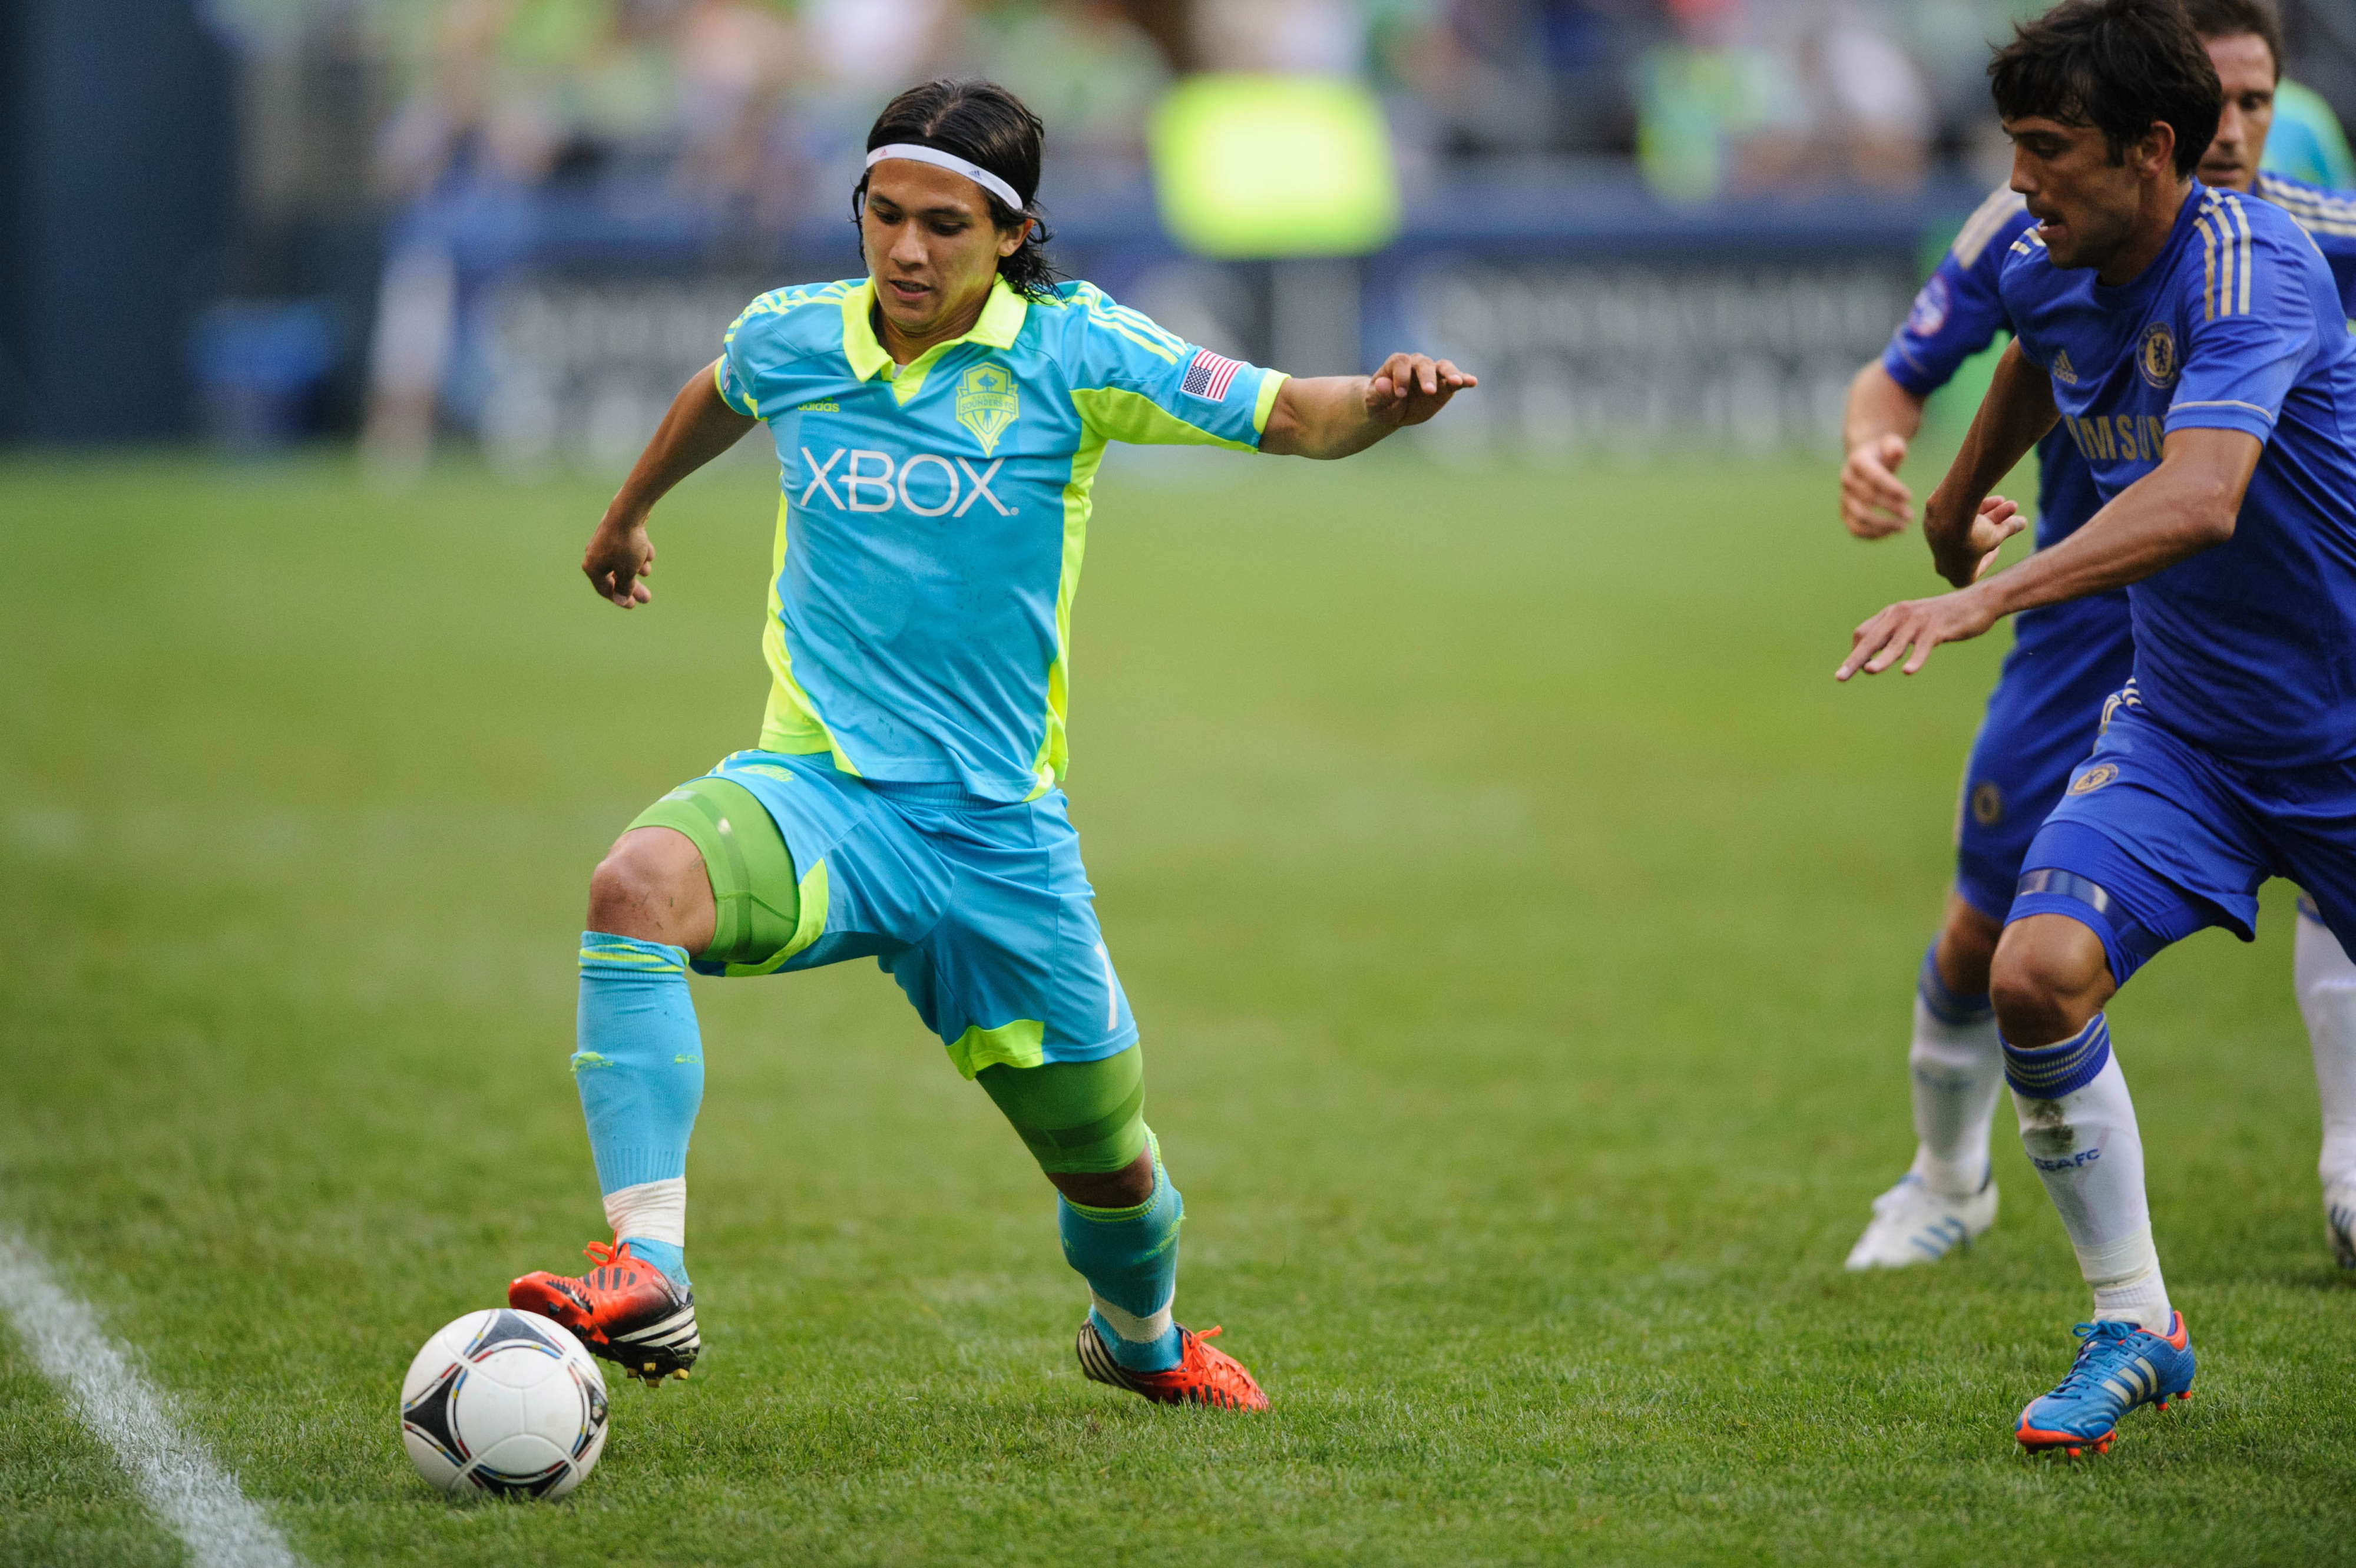 Jul 18, 2012; Seattle, WA, USA; Seattle Sounders FC forward Fredy Montero (17) keeps the ball inbounds during the 2nd half against Chelsea FC at CenturyLink Field. Chelsea FC defeated Seattle 4-2. Mandatory Credit: Steven Bisig-US PRESSWIRE